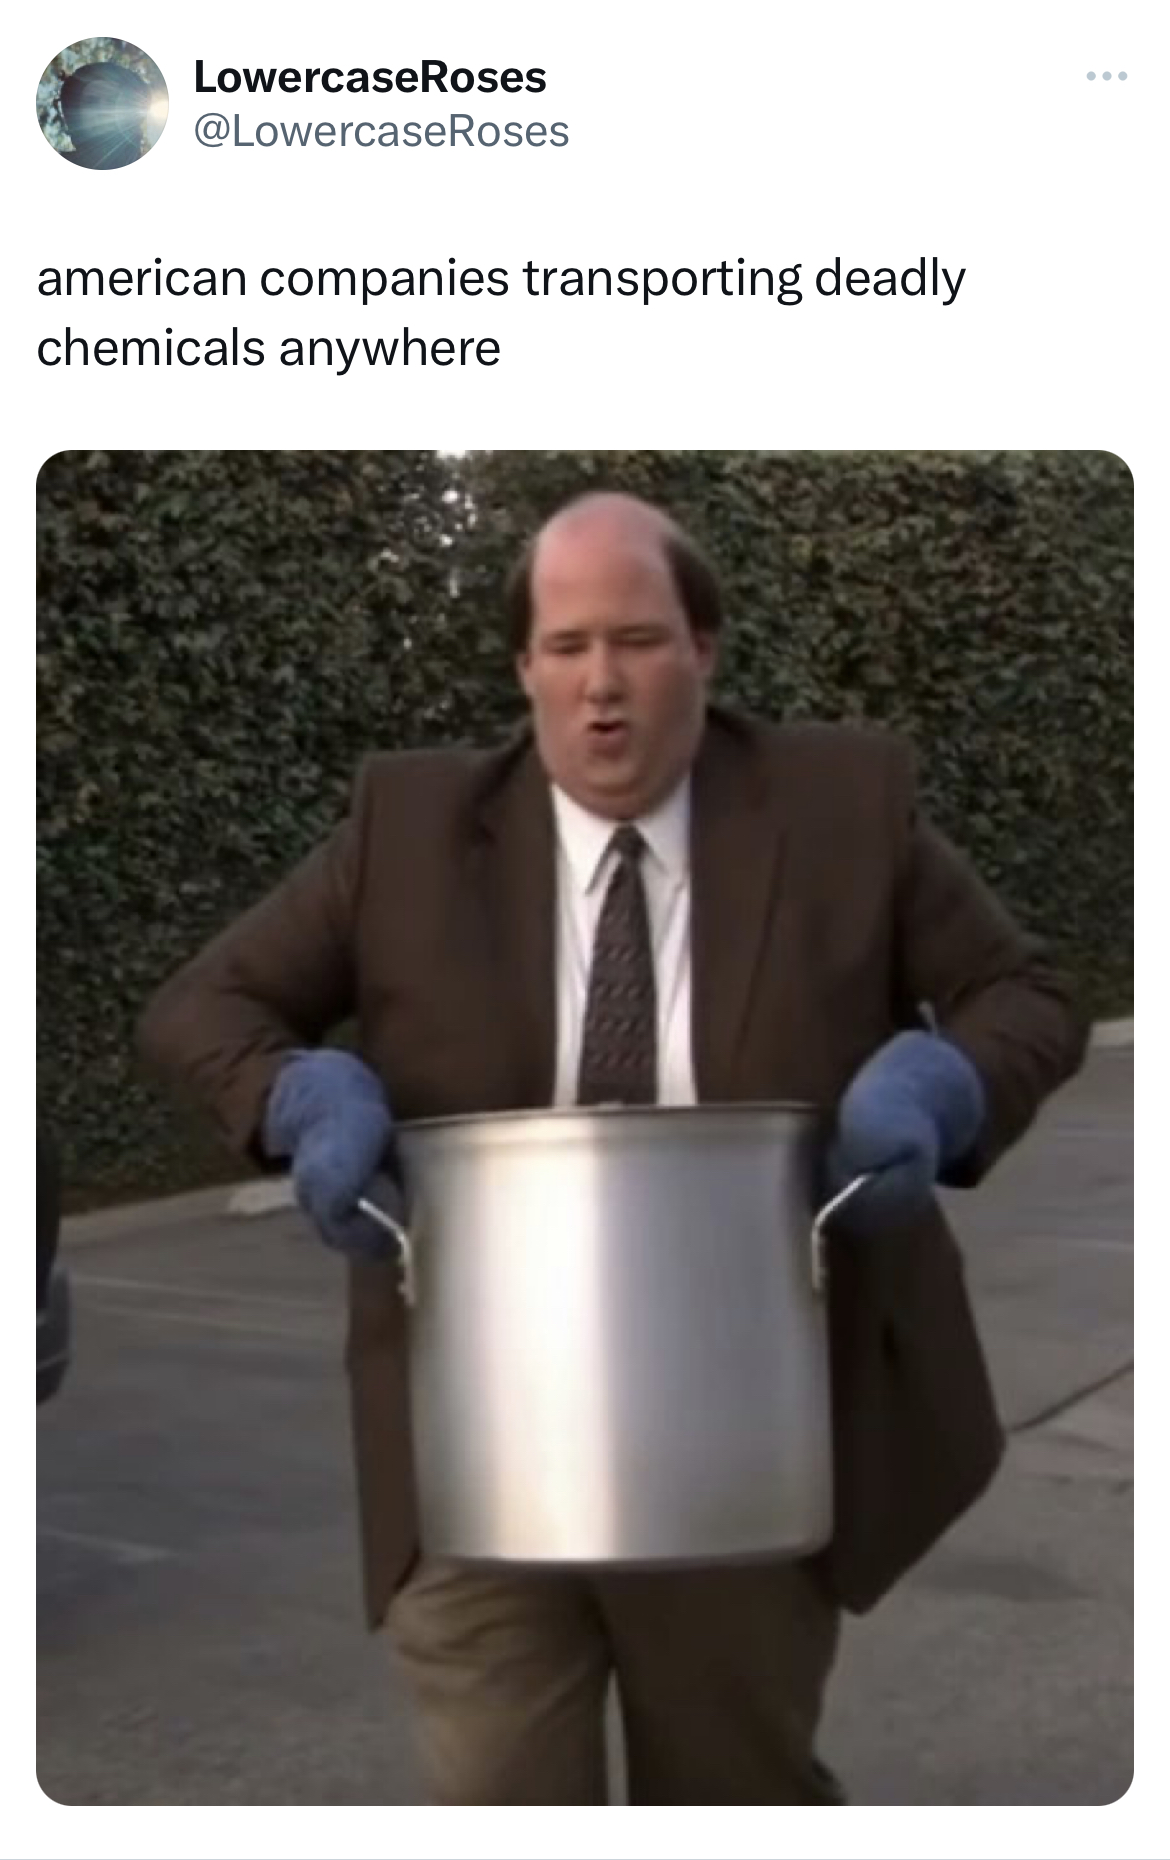 savage and absurd tweets - kevin the office chili - LowercaseRoses american companies transporting deadly chemicals anywhere www